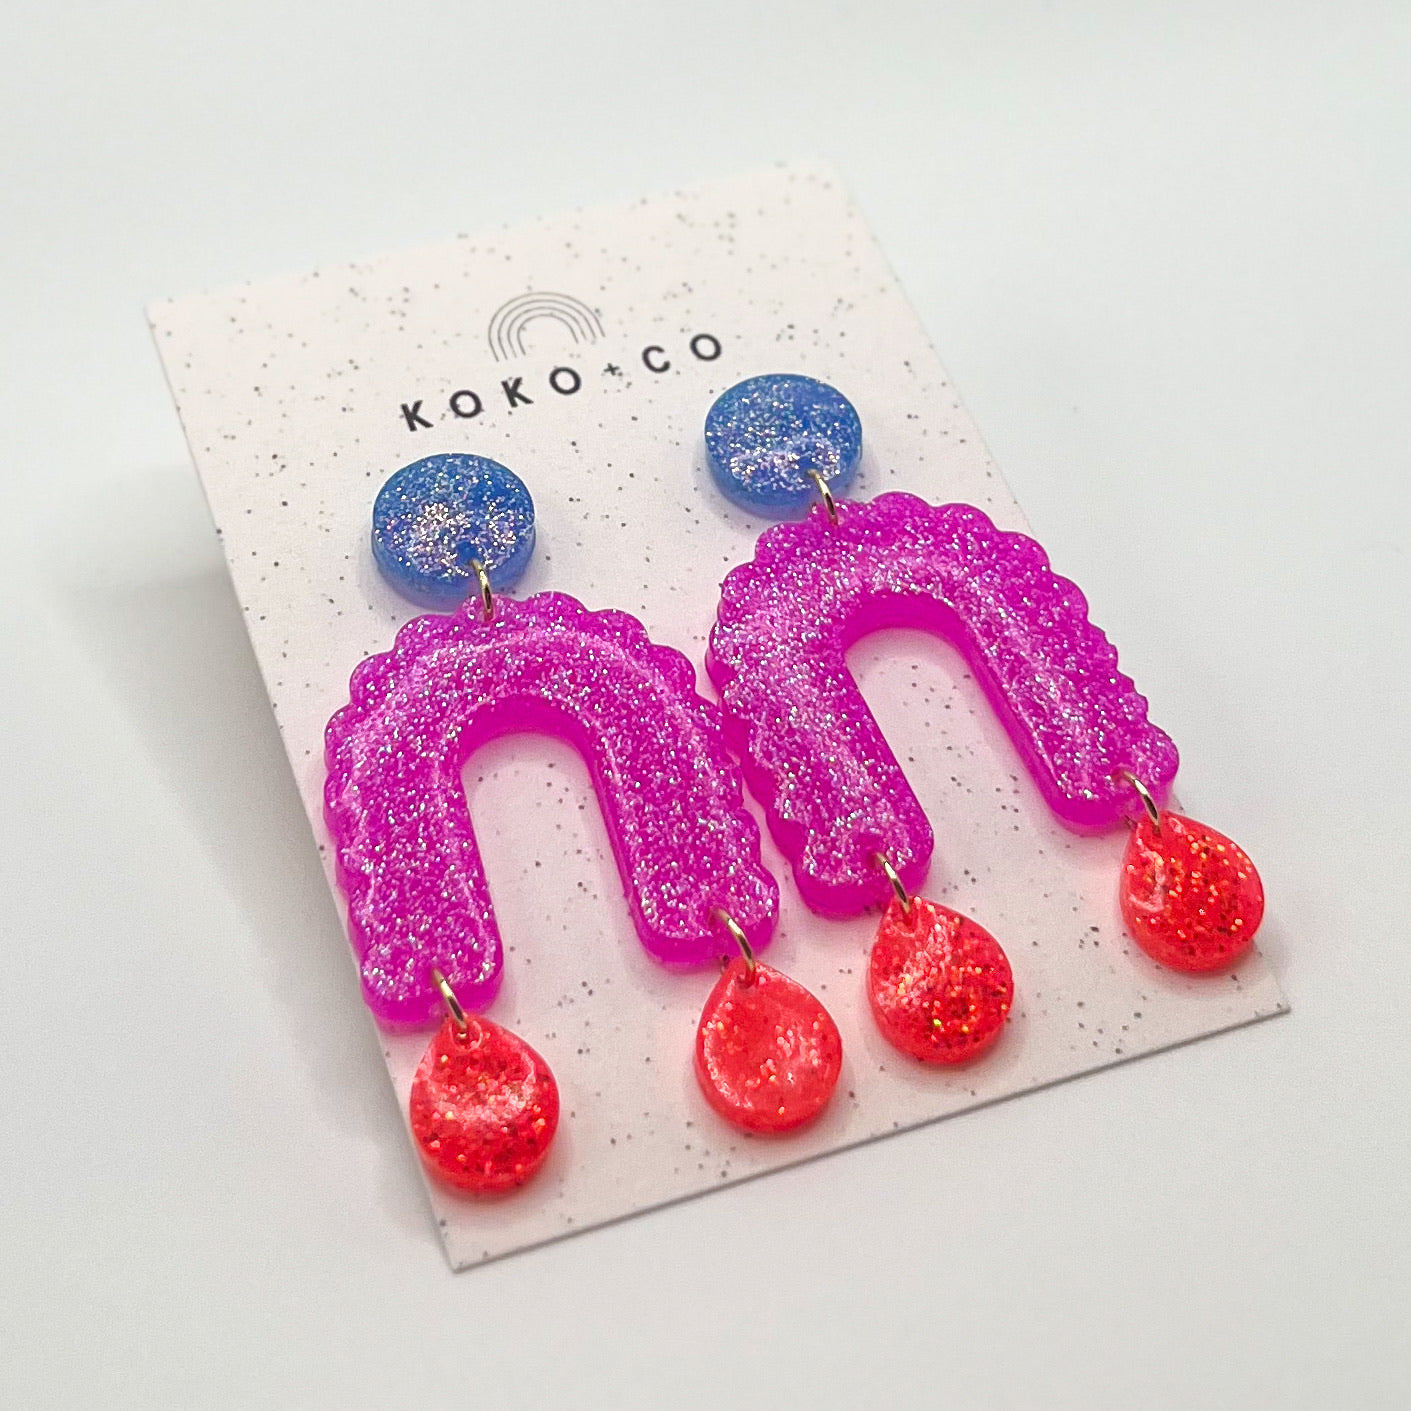 Scallop Arch Earrings in Periwinkle, Pink and Orange